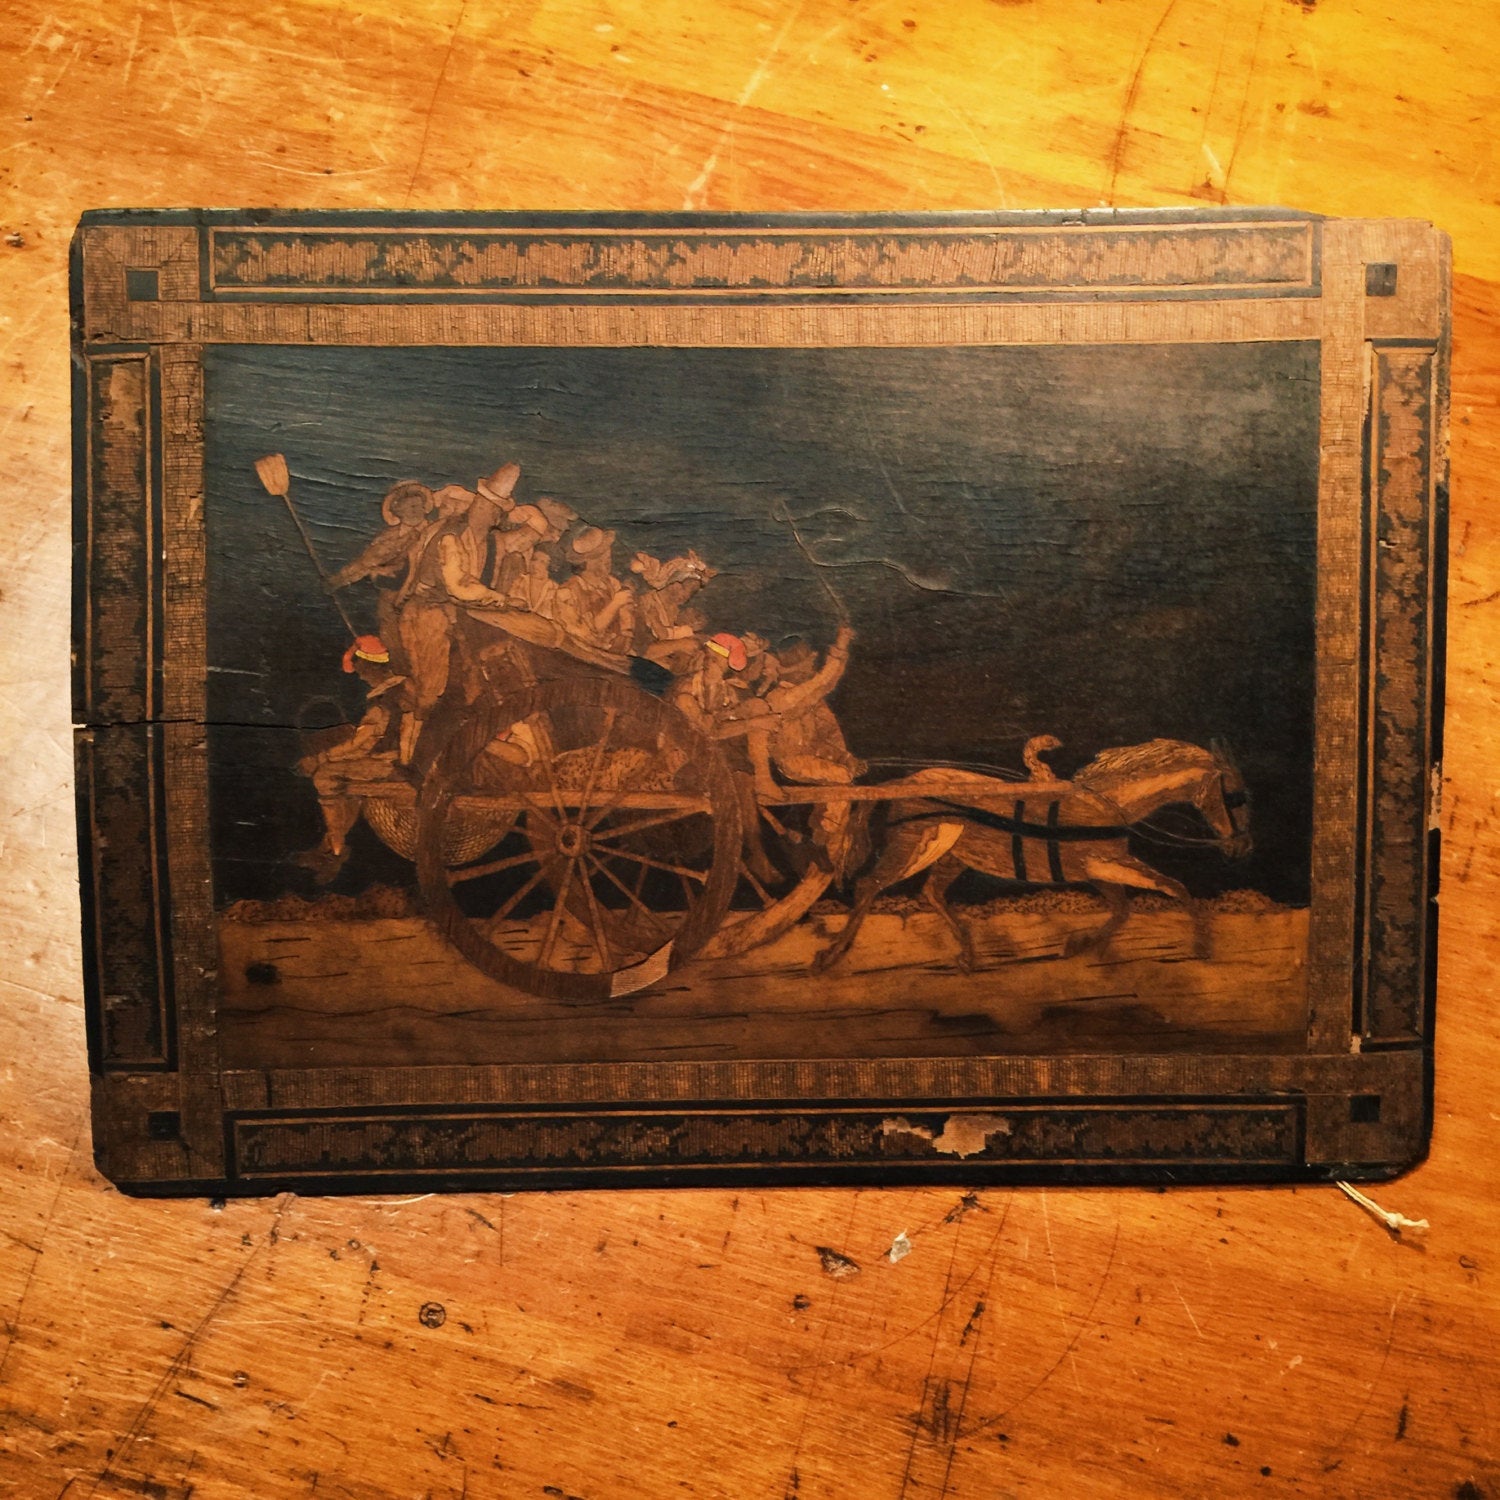 Pyrography Wood Burning of Carriage, Horse, Mob and Whip - Pyrography Art - Flemish? - Mystery artist - Turn of the Century - Antique